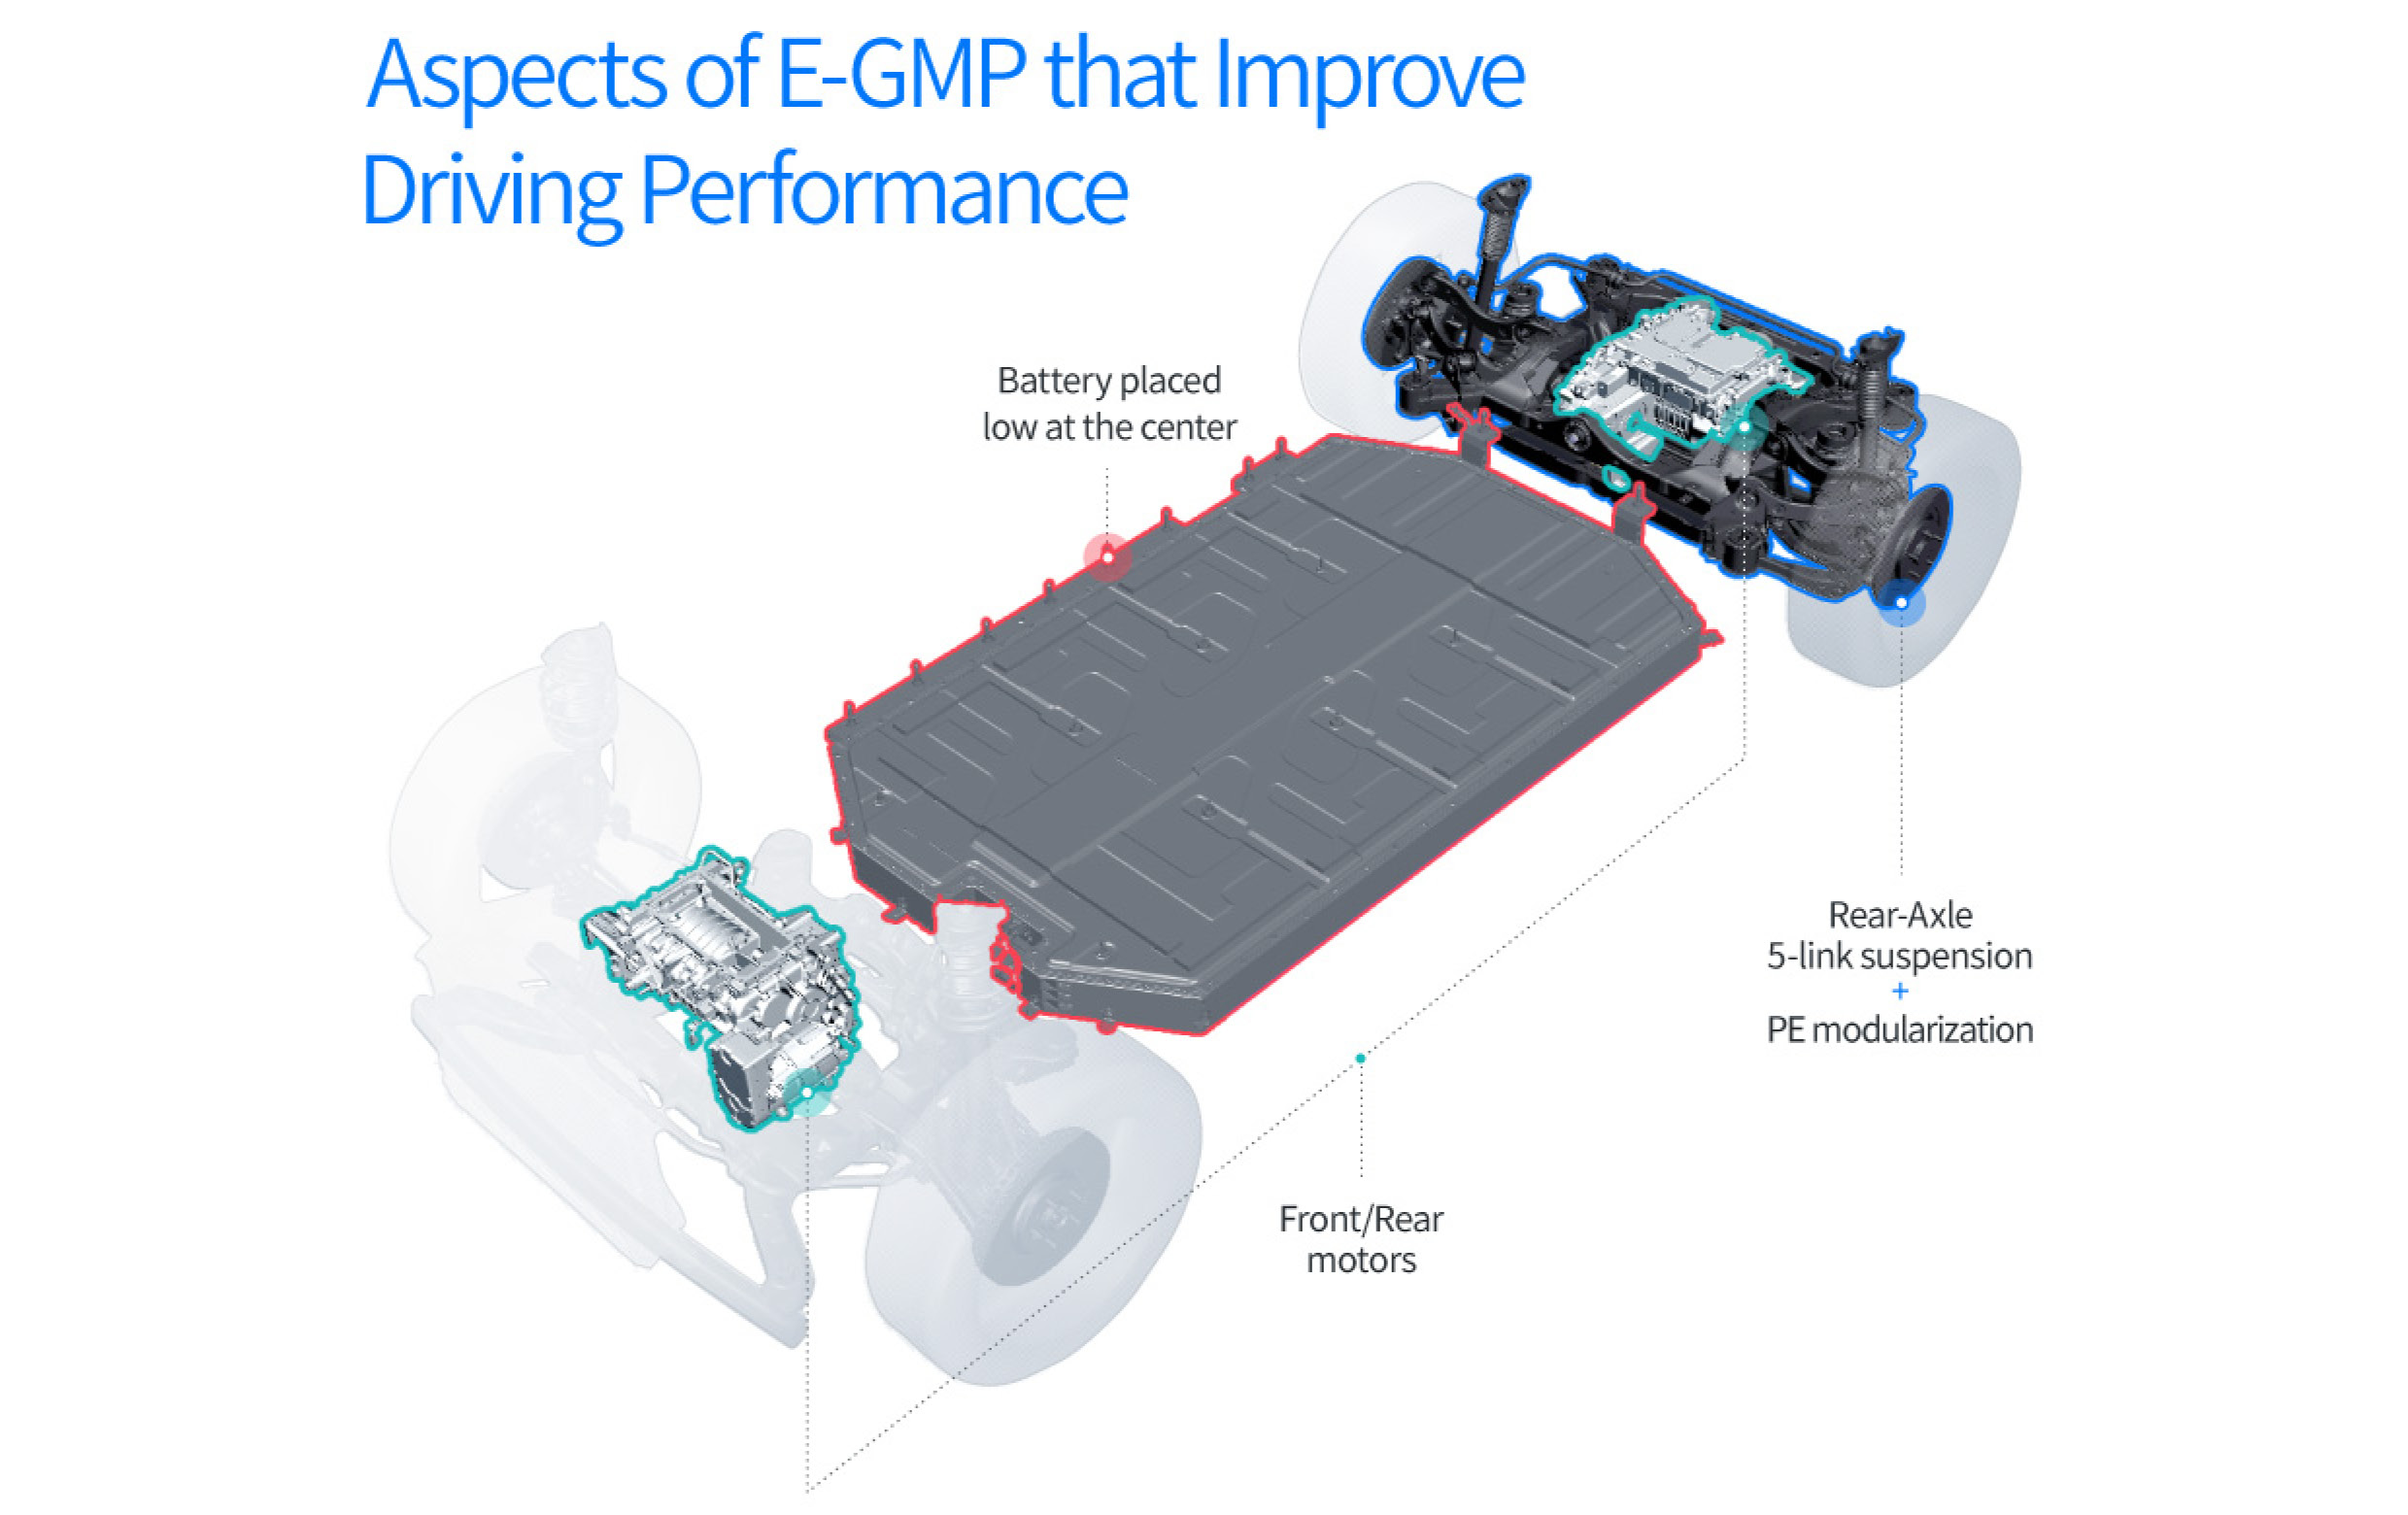 Layout of the E-GMP's motor and battery